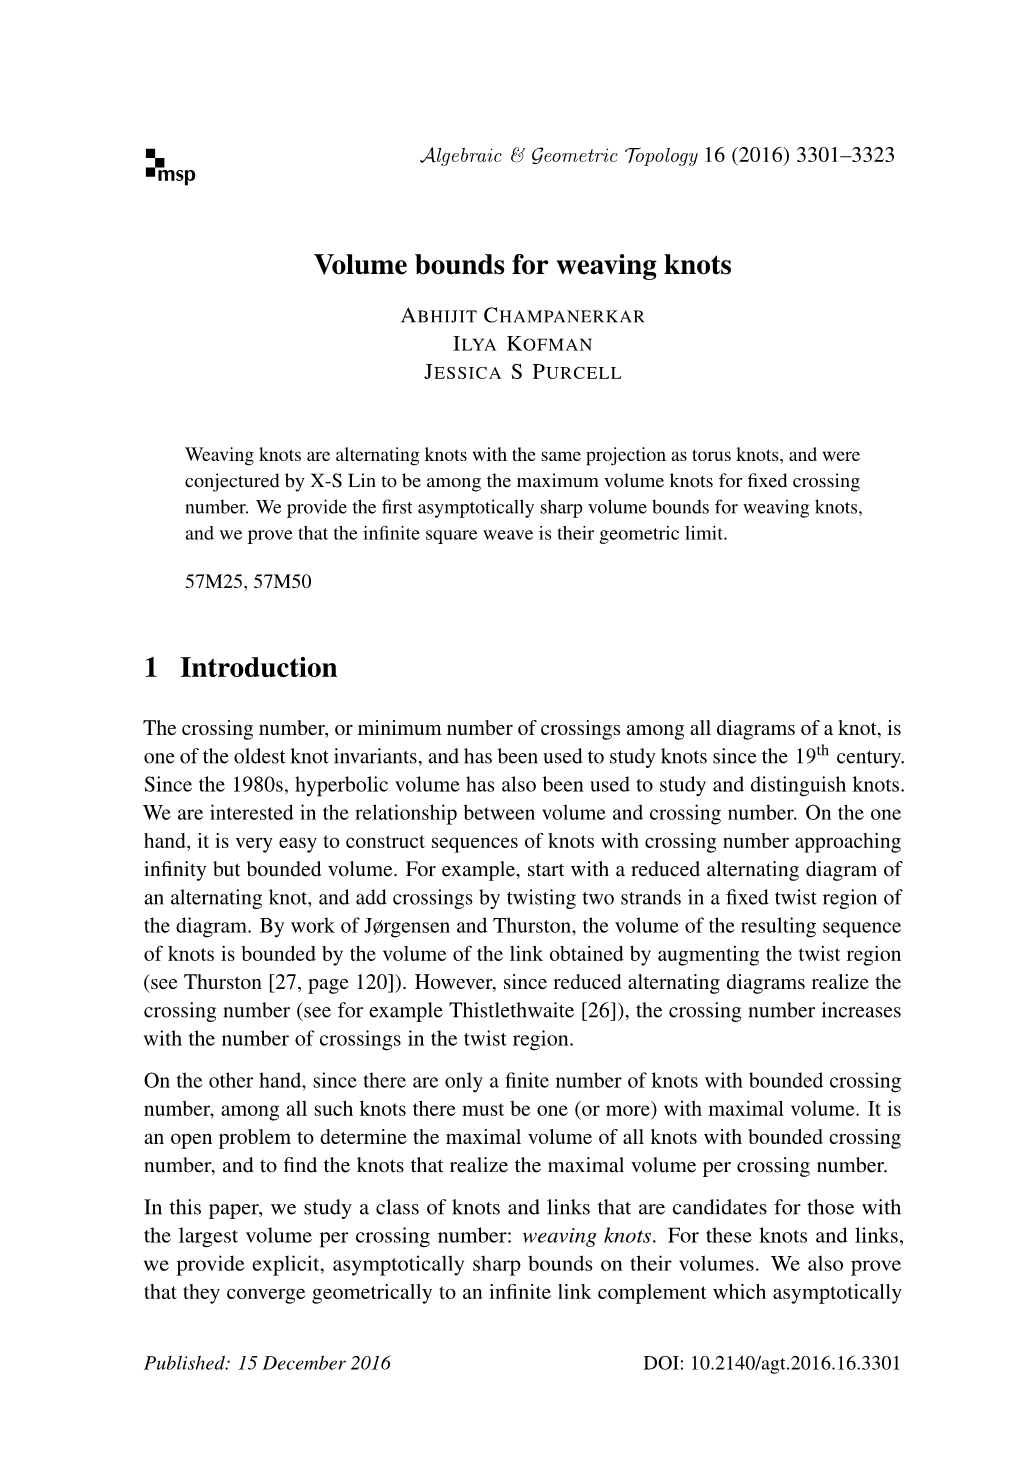 Volume Bounds for Weaving Knots